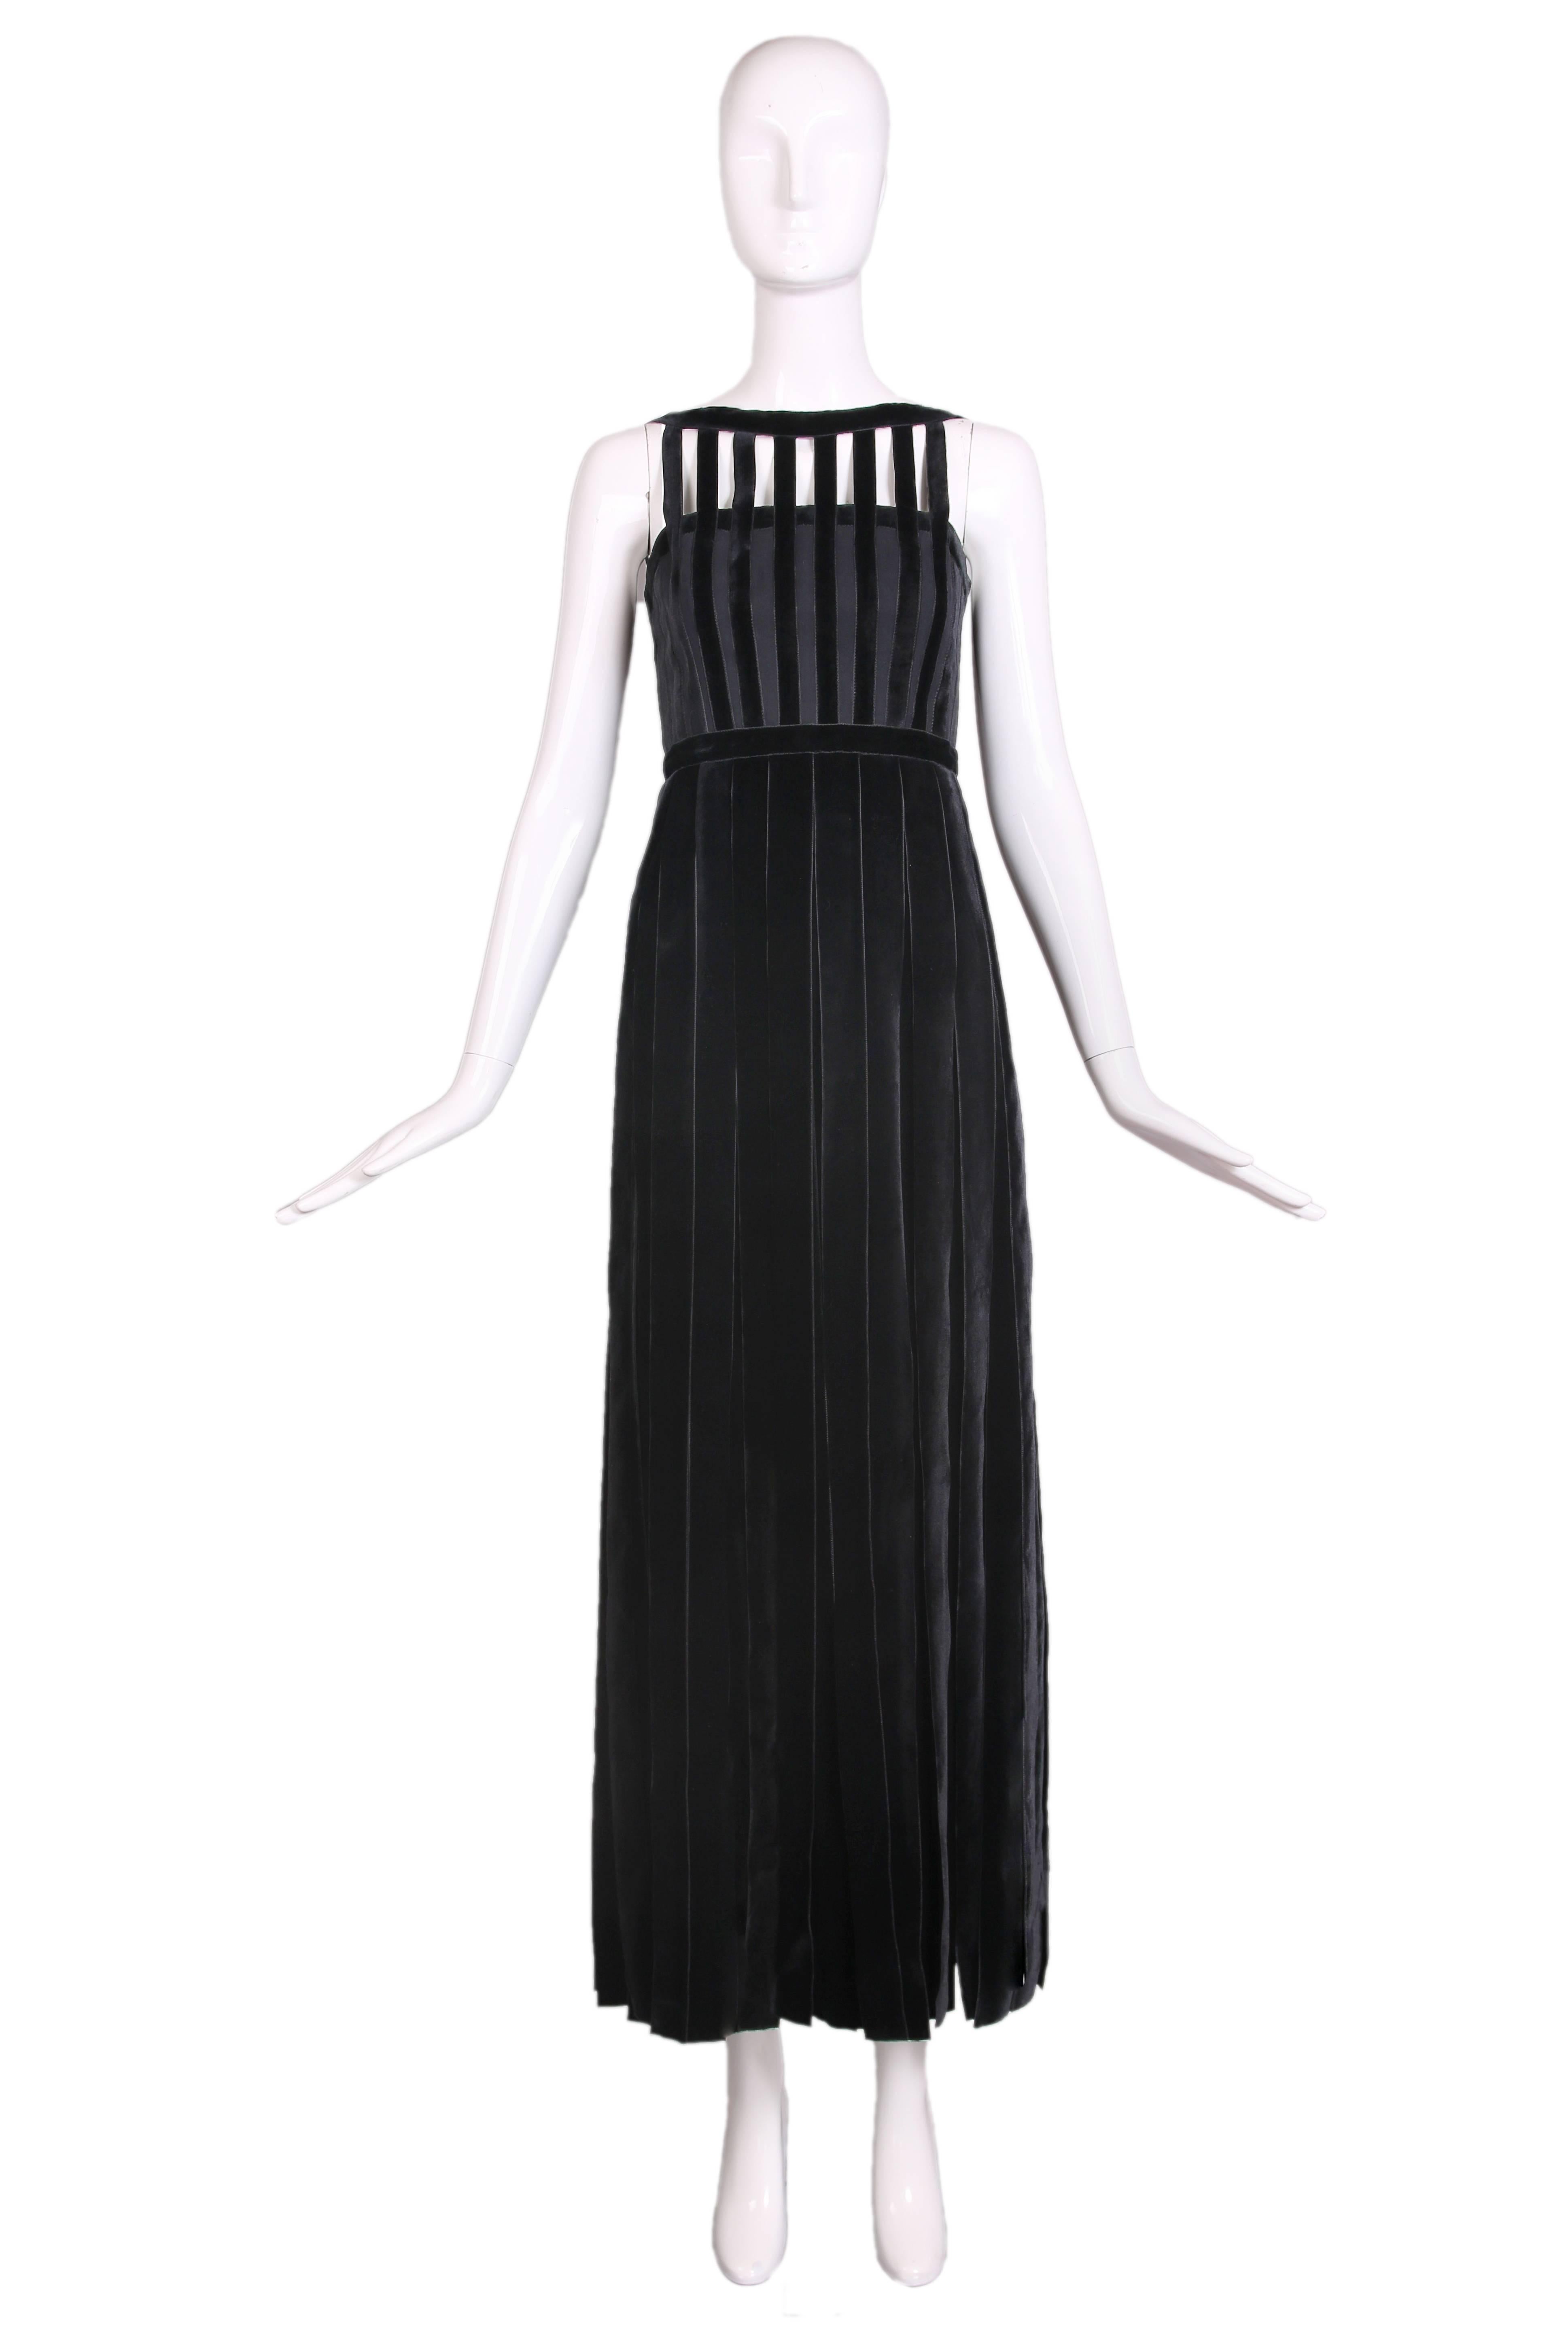 Vintage Chloe black sleeveless gown with a velvet cage top. Dress is a double layer - Beginning at the waist, long velvet ribbons overlay a sheer skirt. The skirt has velvet trim and two additional horizontal velvet stripes. Two fabric-covered